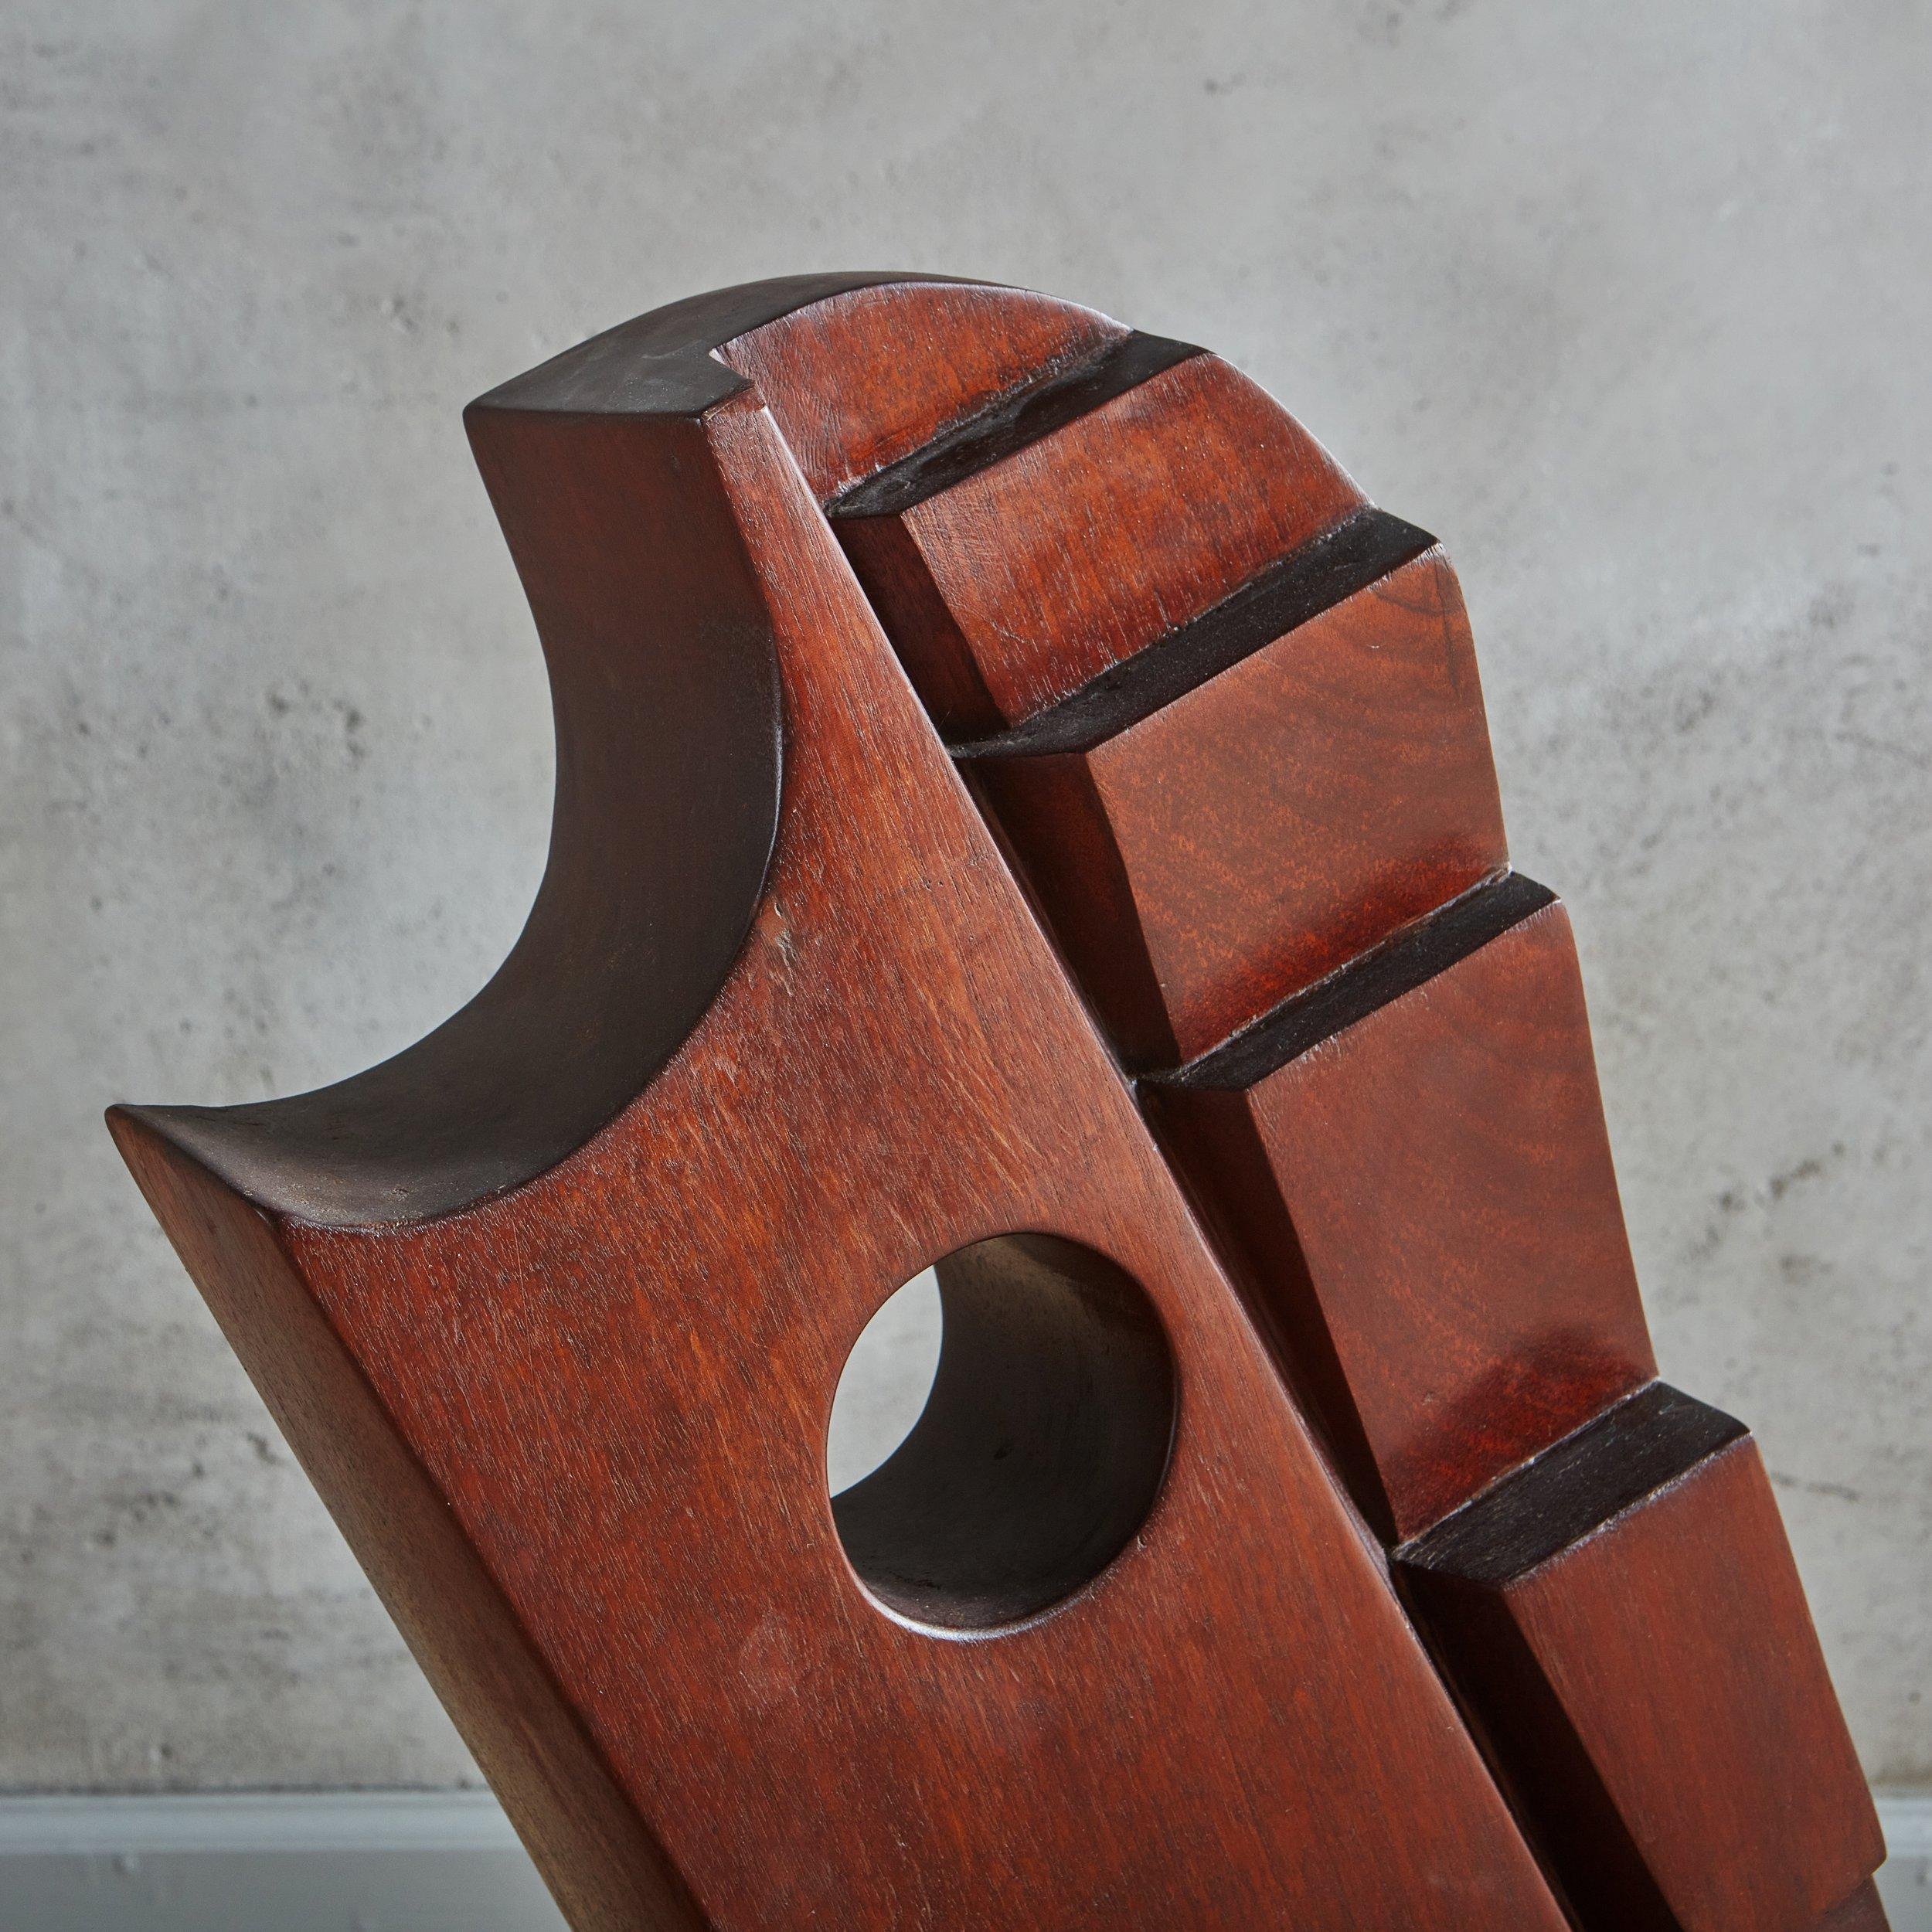 Modern Geometric Wooden Sculpture by Suzanne Sumner, 1970s For Sale